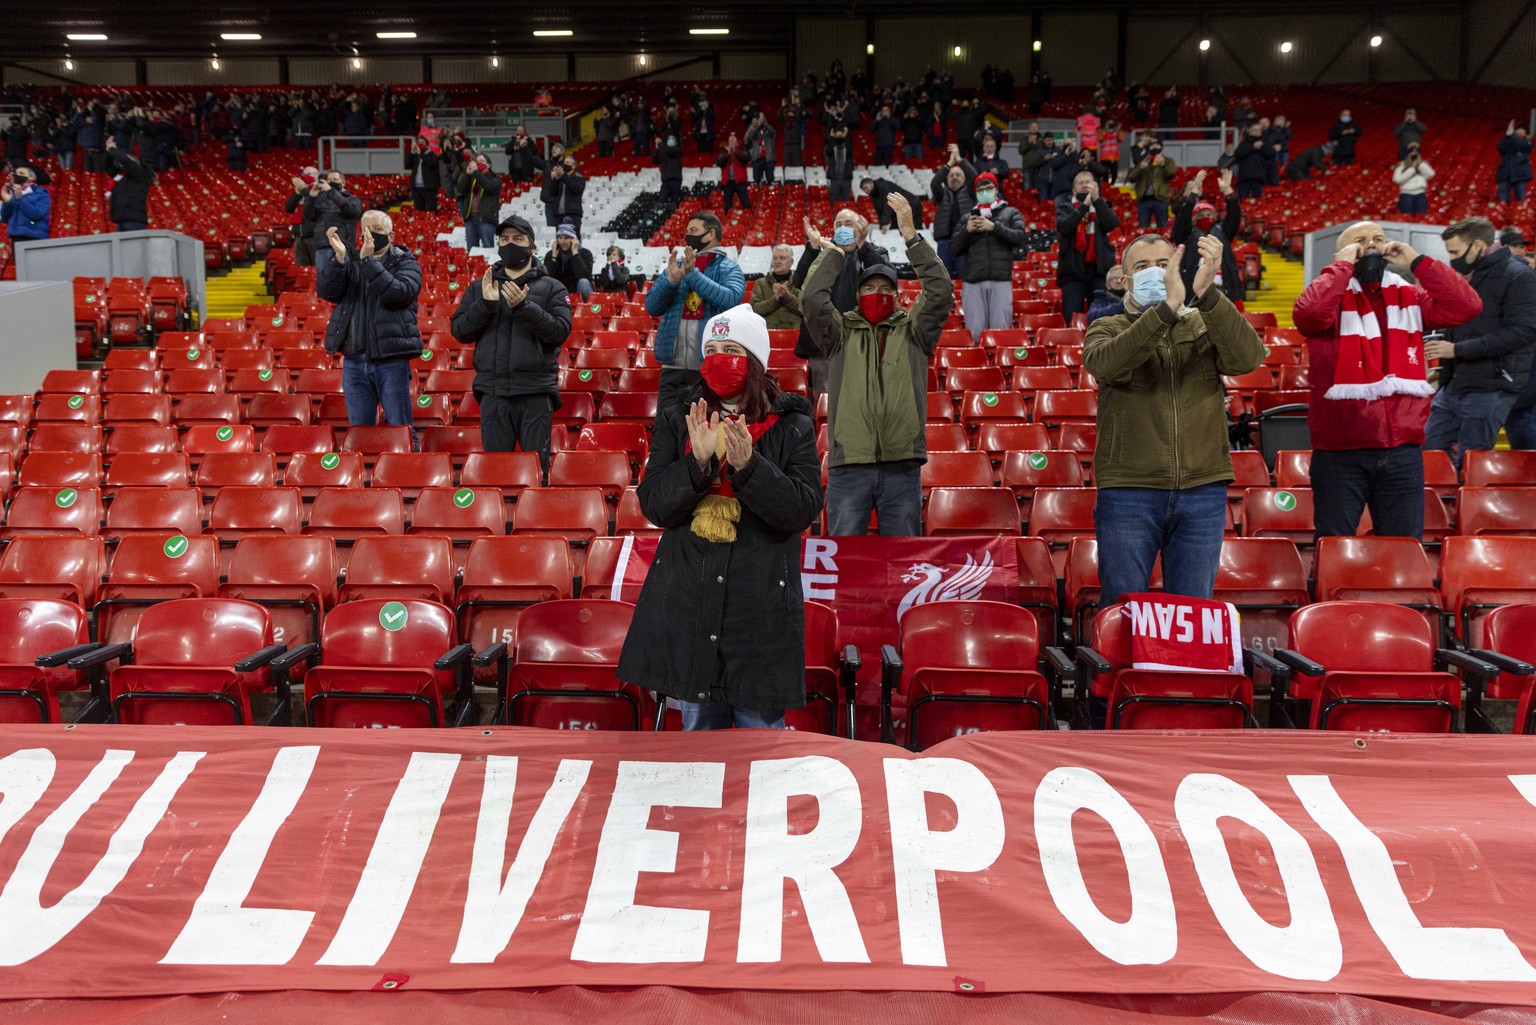 201207 -- LIVERPOOL, Dec. 7, 2020 -- Liverpool s supporters react before the English Premier League match between Liverpool FC and Wolverhampton Wanderers FC in Liverpool, Britain, on Dec. 6, 2020. FO ...